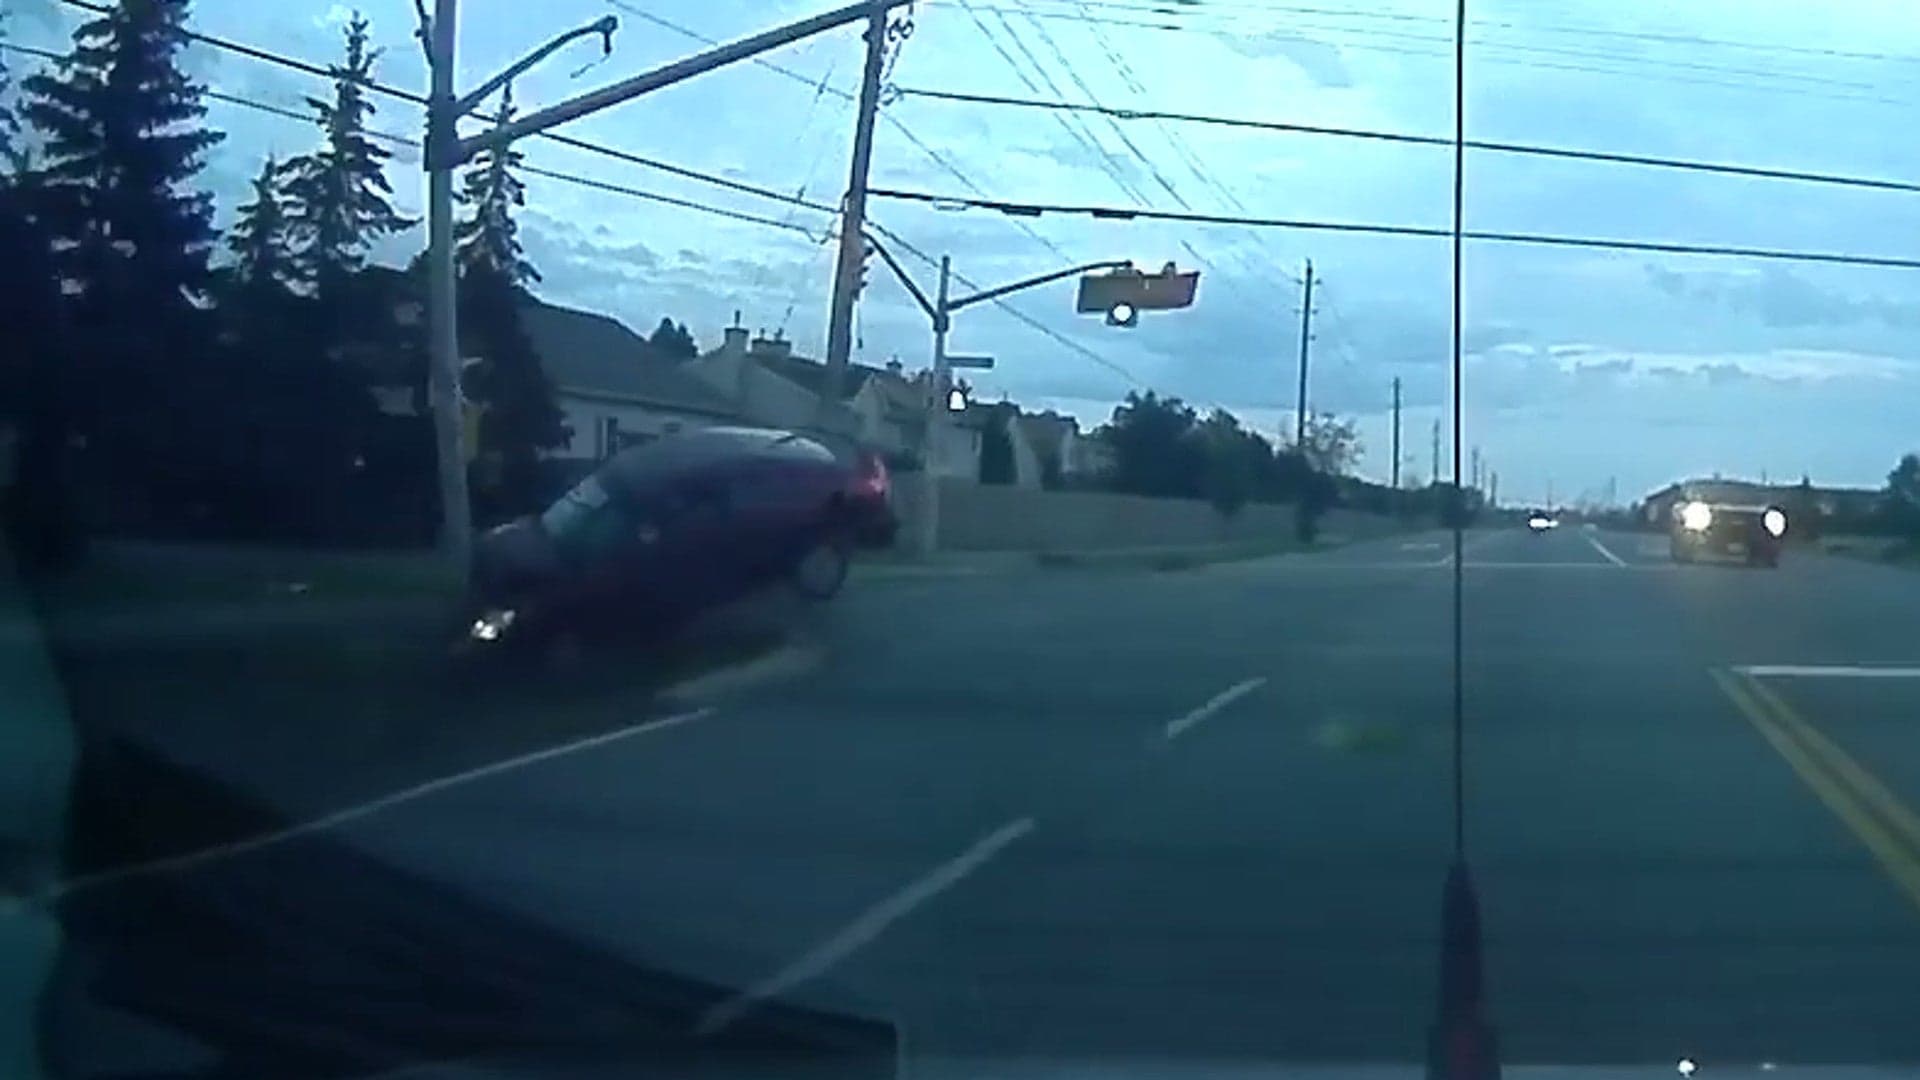 Watch This Inattentive Driver Soar Over an Intersection and Smash Into a Pole